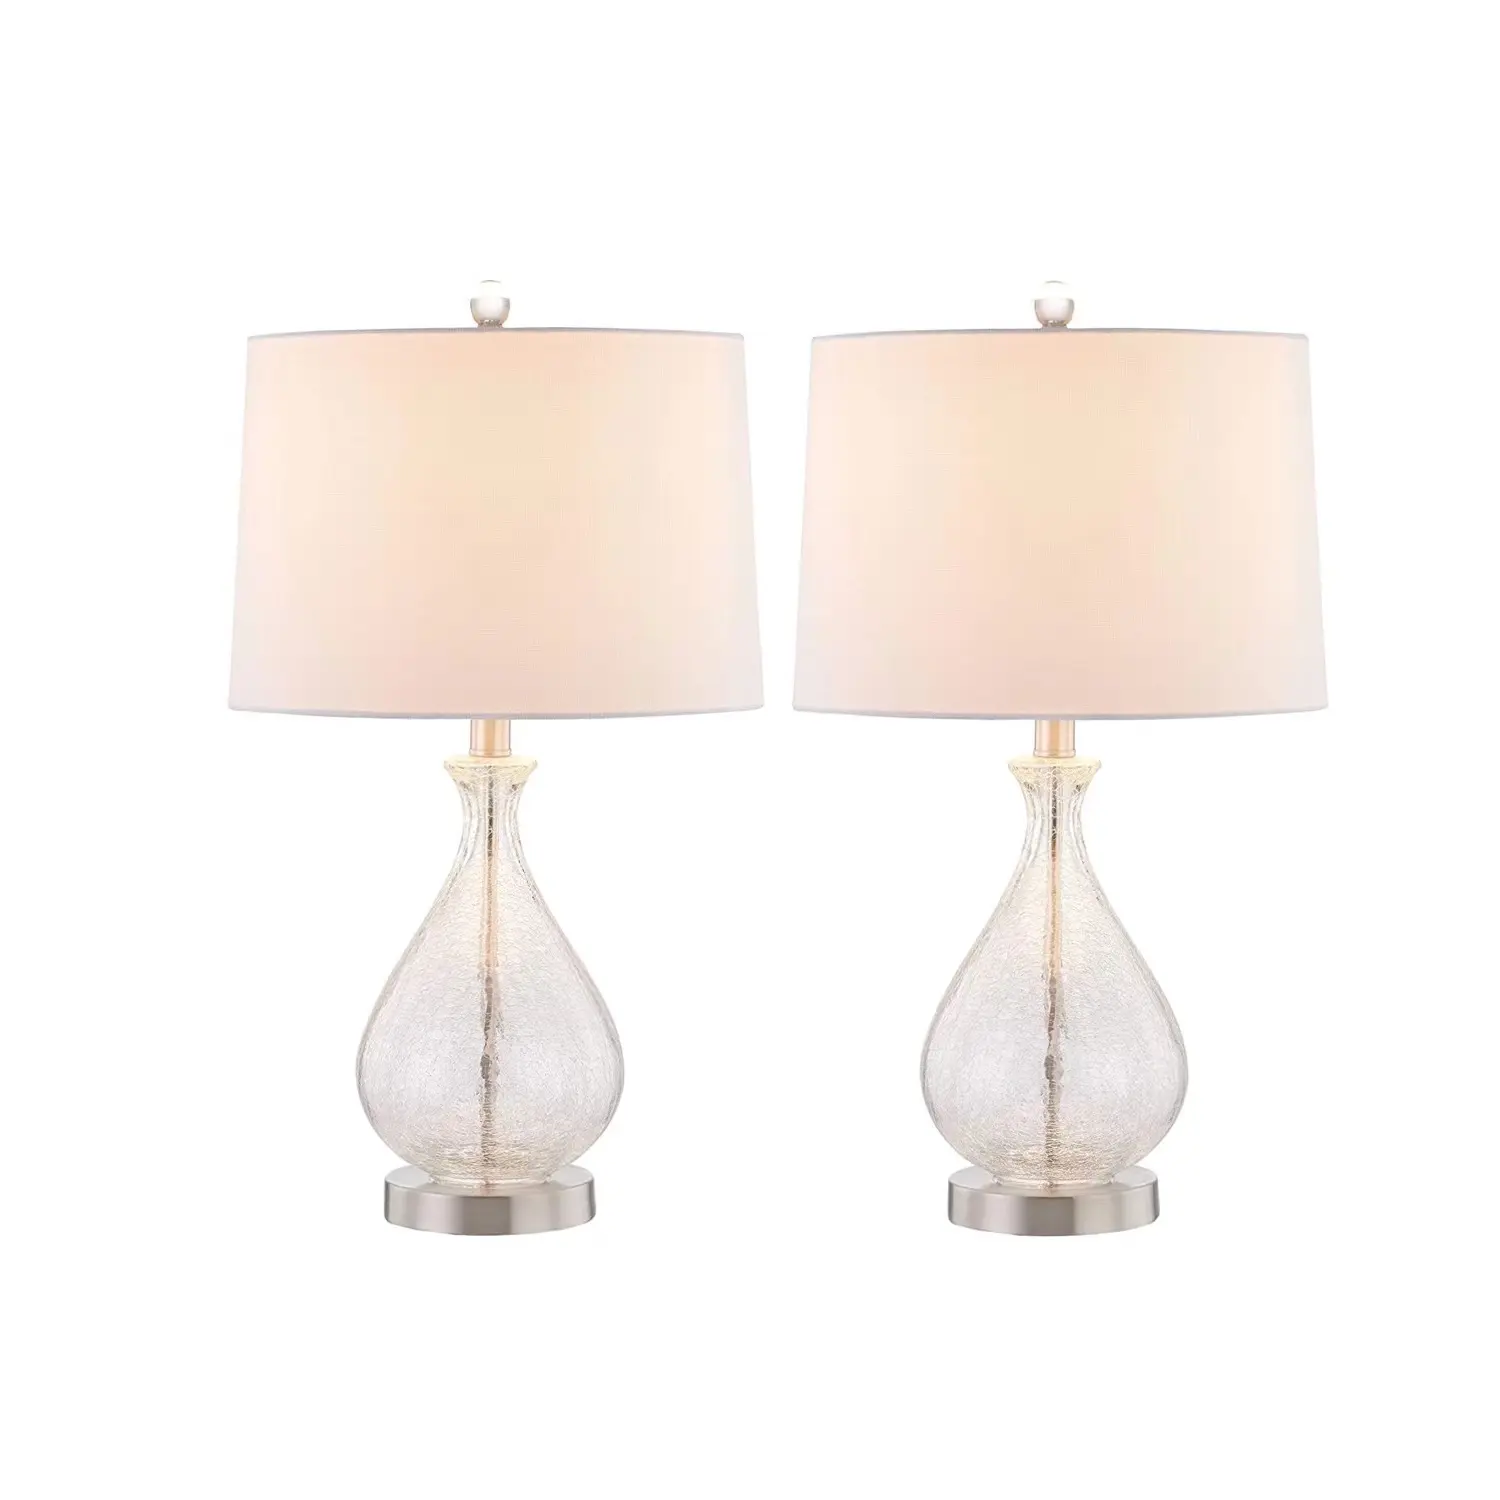 Set of 2 Bedside Table Lamps Glass Nightstand Lamp For Coffee Table and Living Room